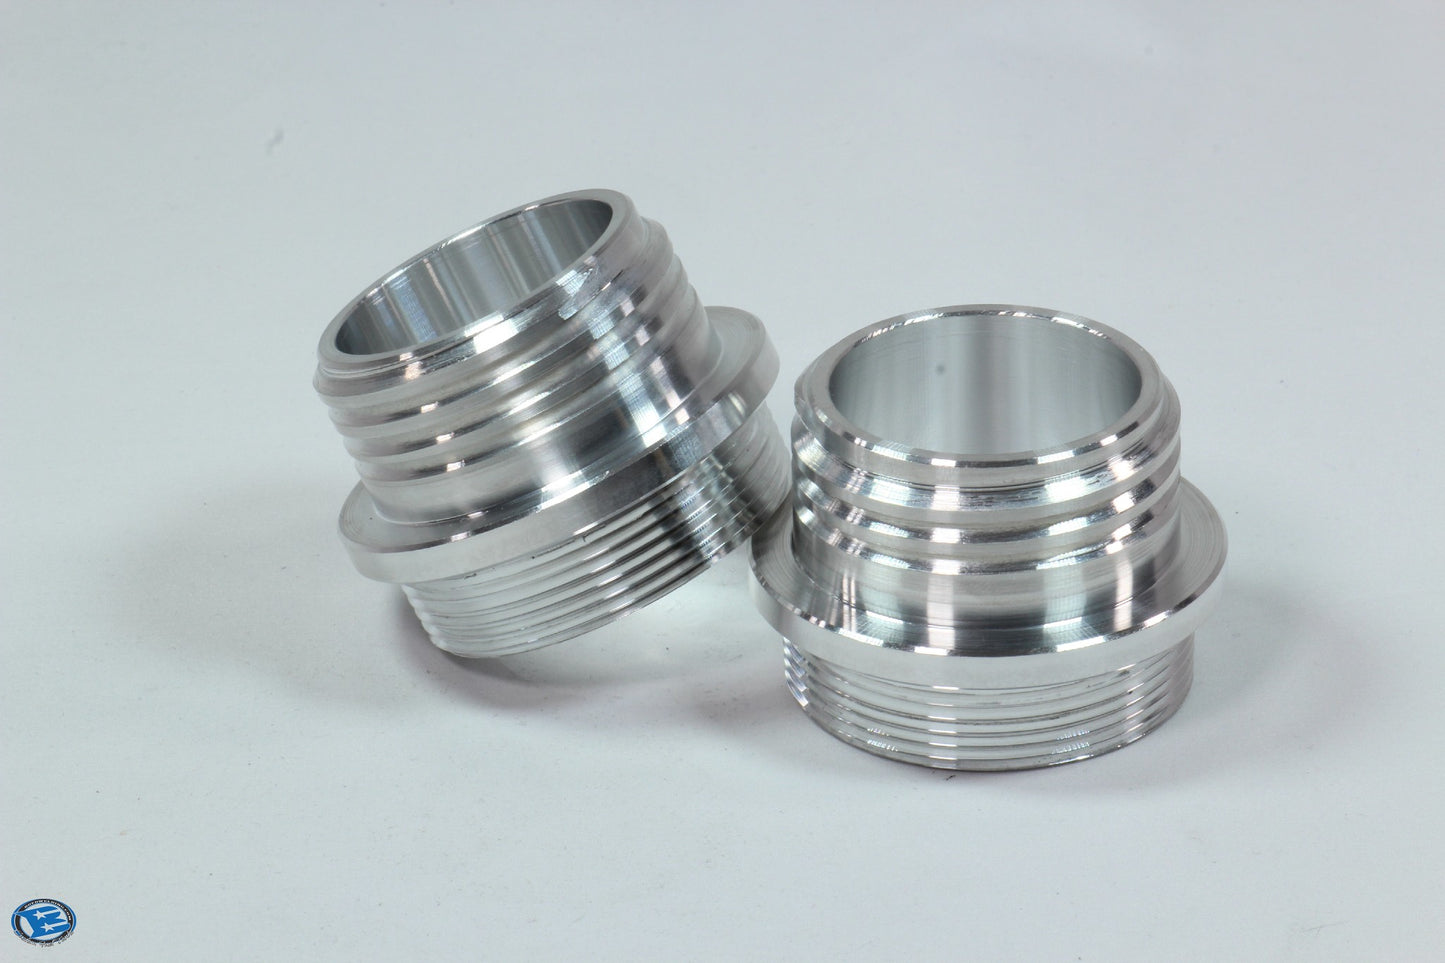 225 Series 5TPI Buttress Thread to 2" NPT Adapter